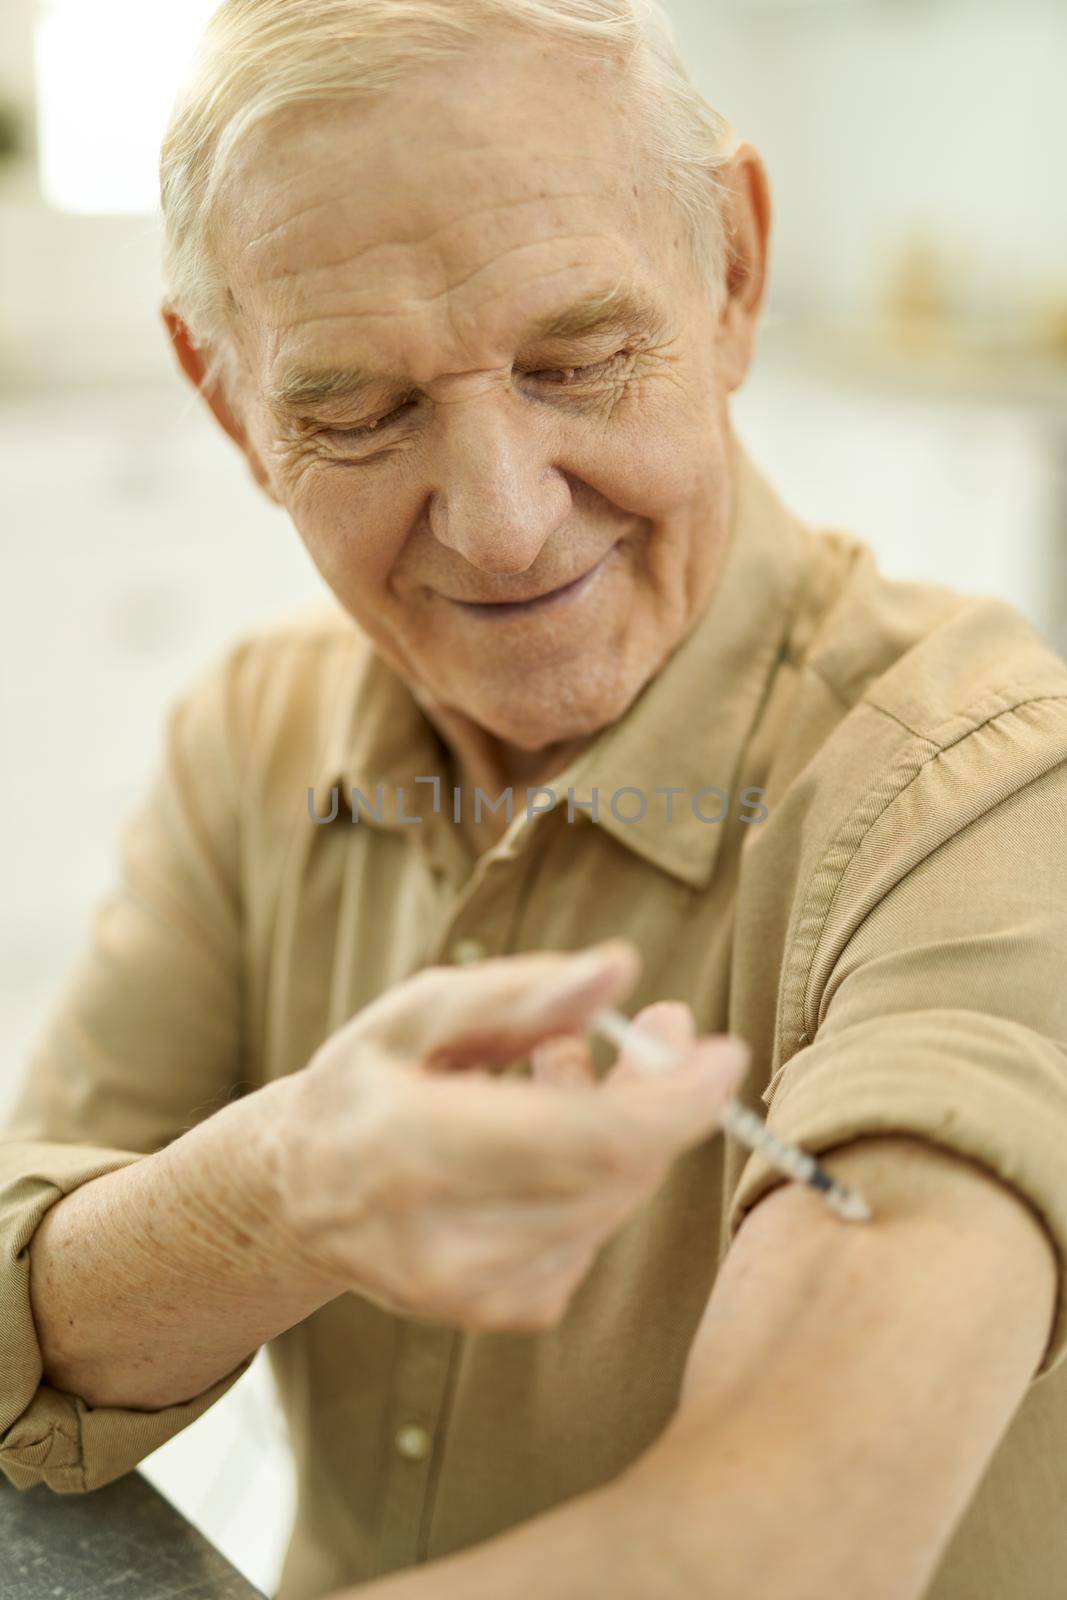 Close-up photo of a mirthful aged man with a rolled-up sleeve performing an arm injection on himself